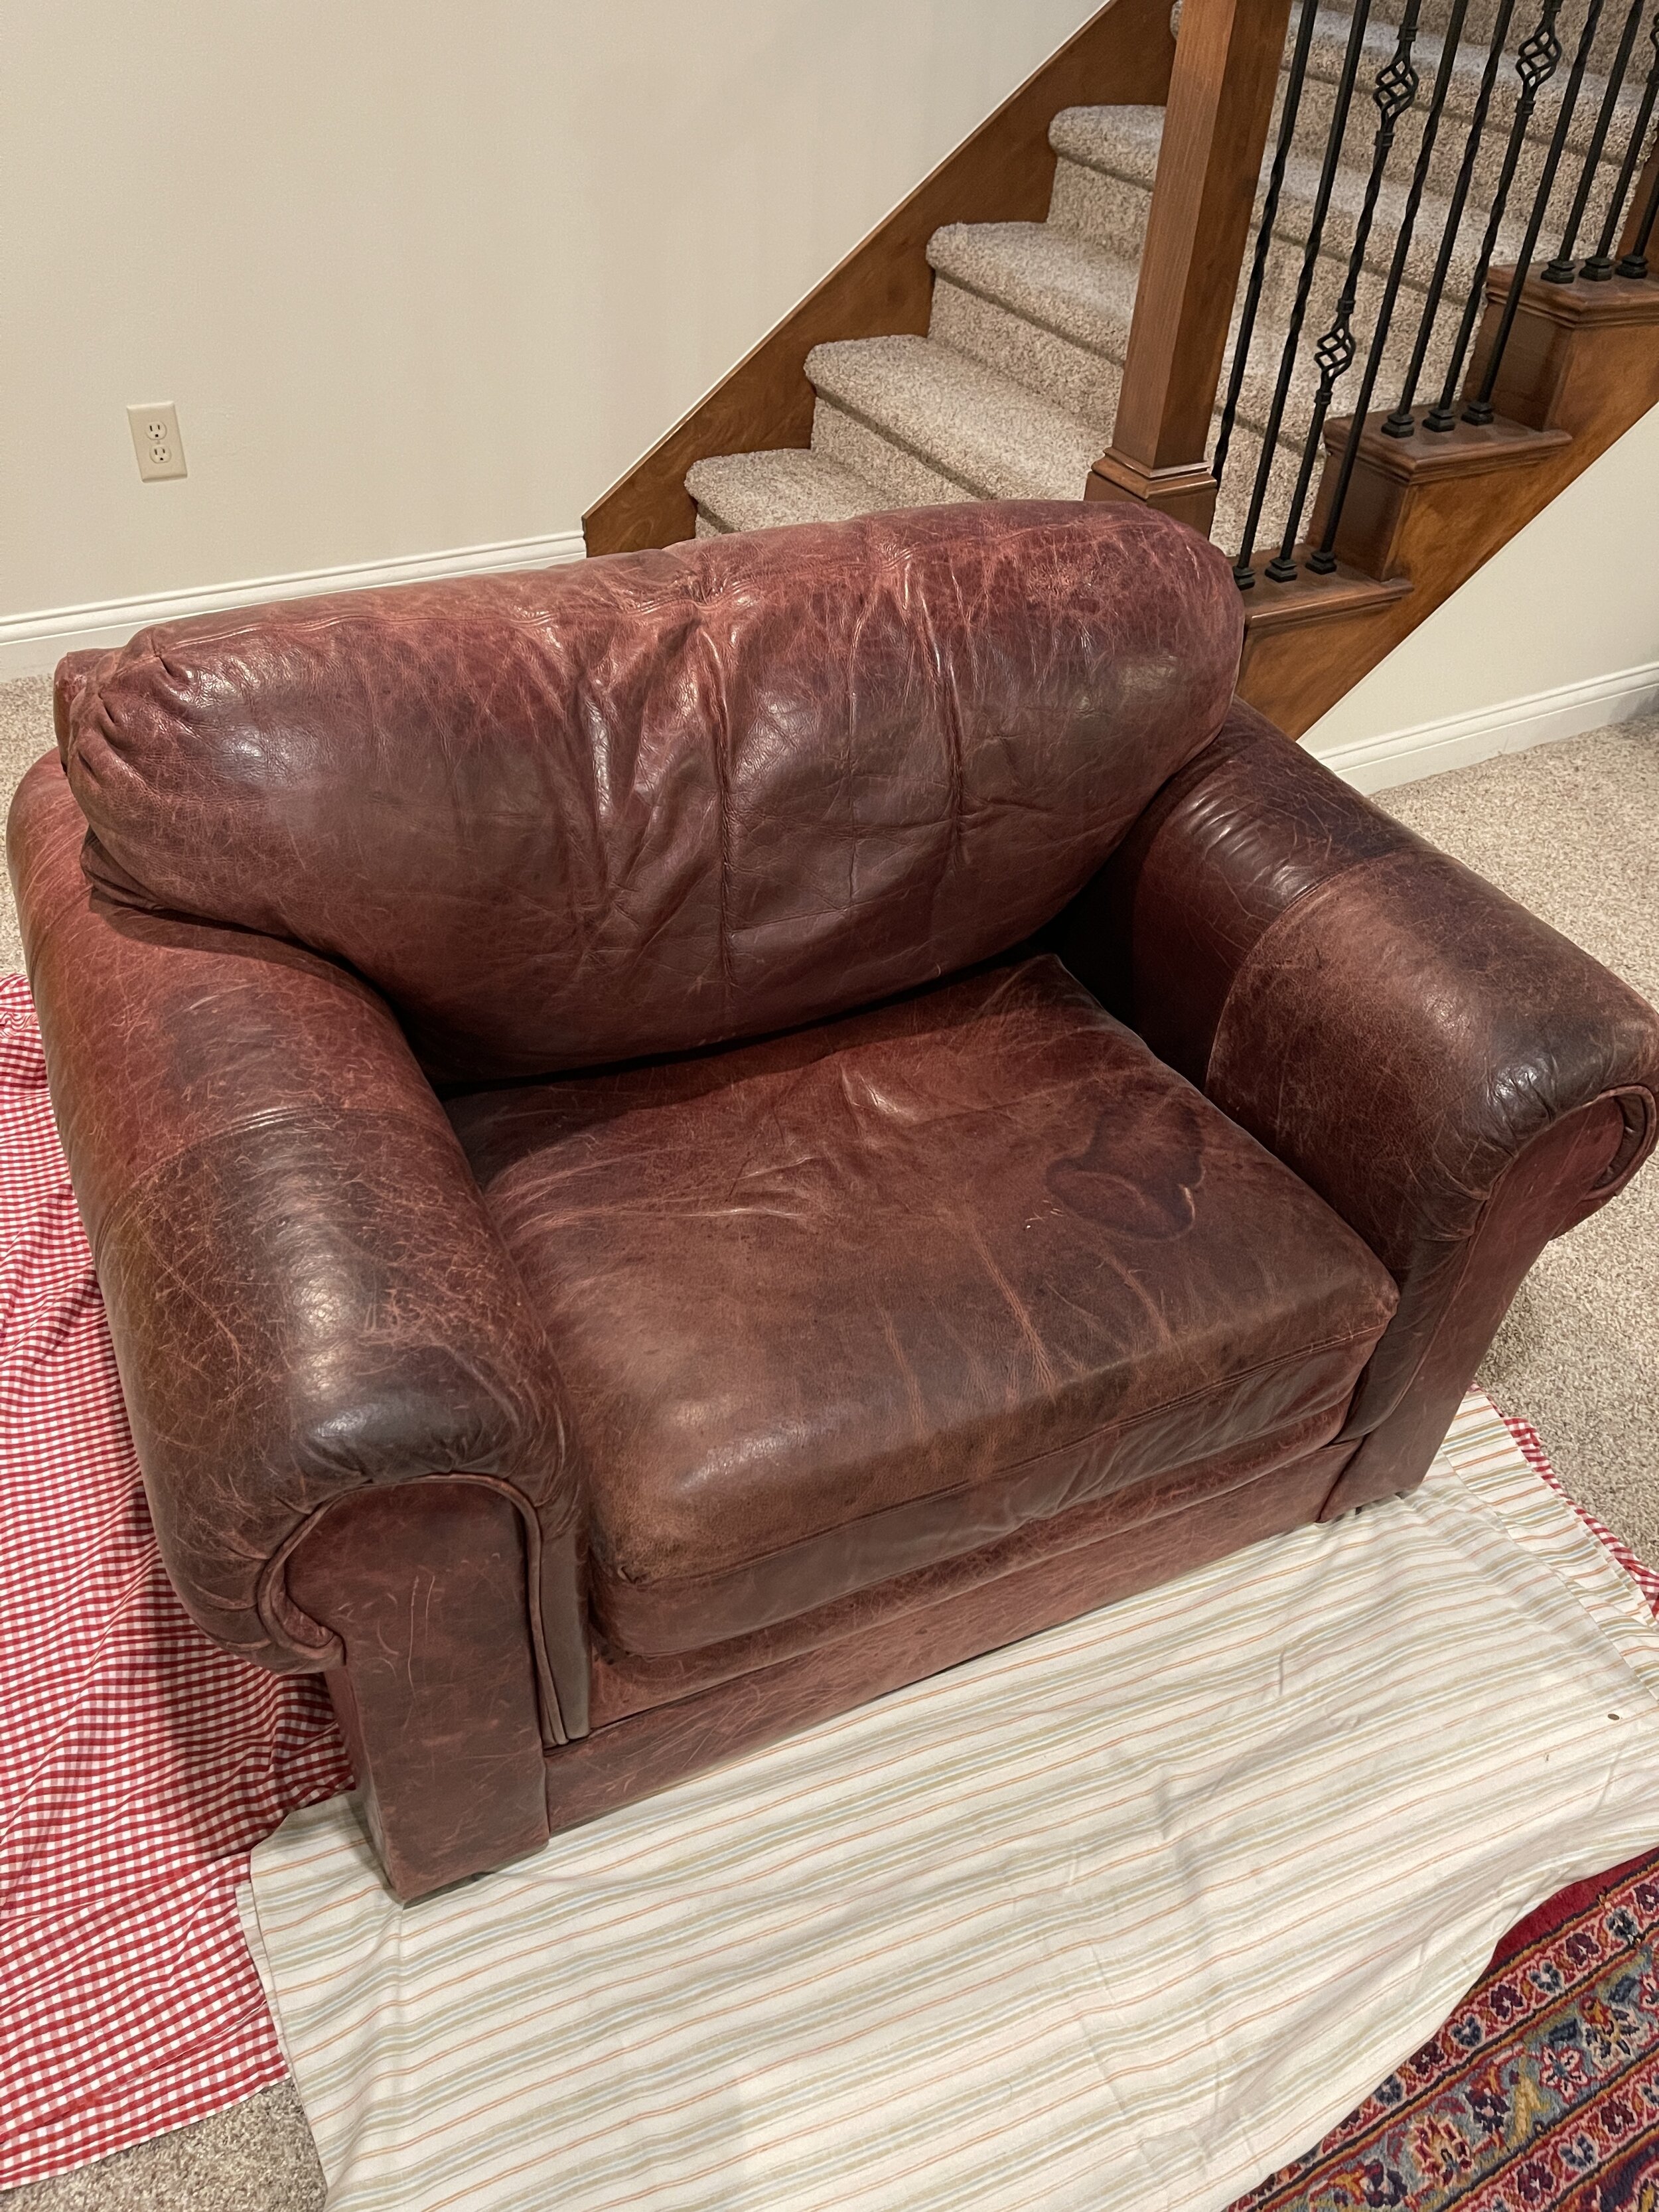 How To Paint Leather Furniture, Paint For Leather Couch